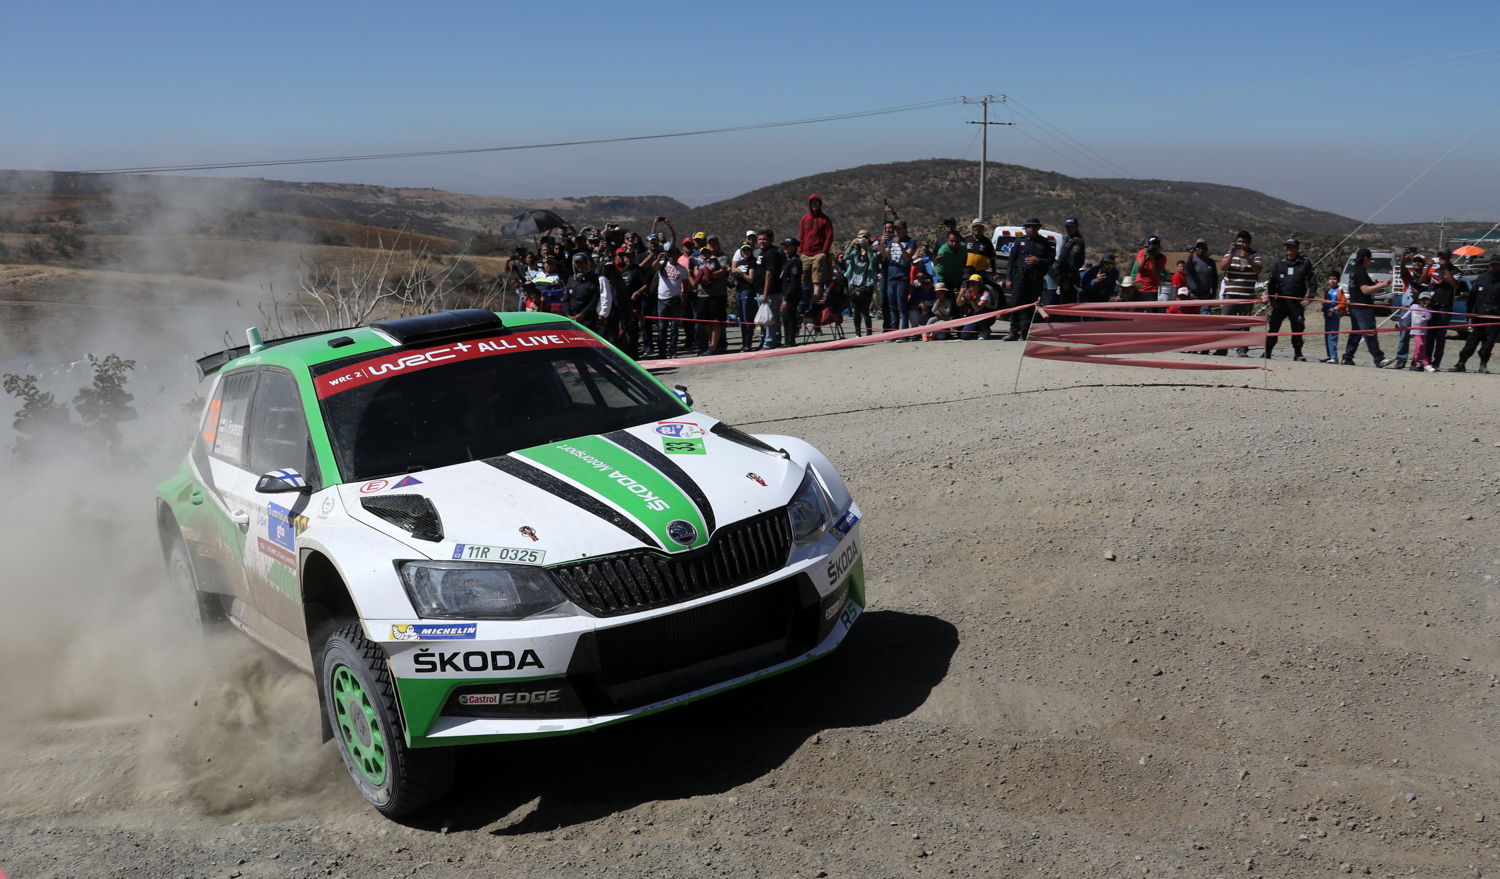 At the fifth round of 2018 FIA World Rally Championship, Finnish youngsters Kalle Rovanperä and Jonne Halttunen make their second appearance for the factory team of ŠKODA Motorsport.